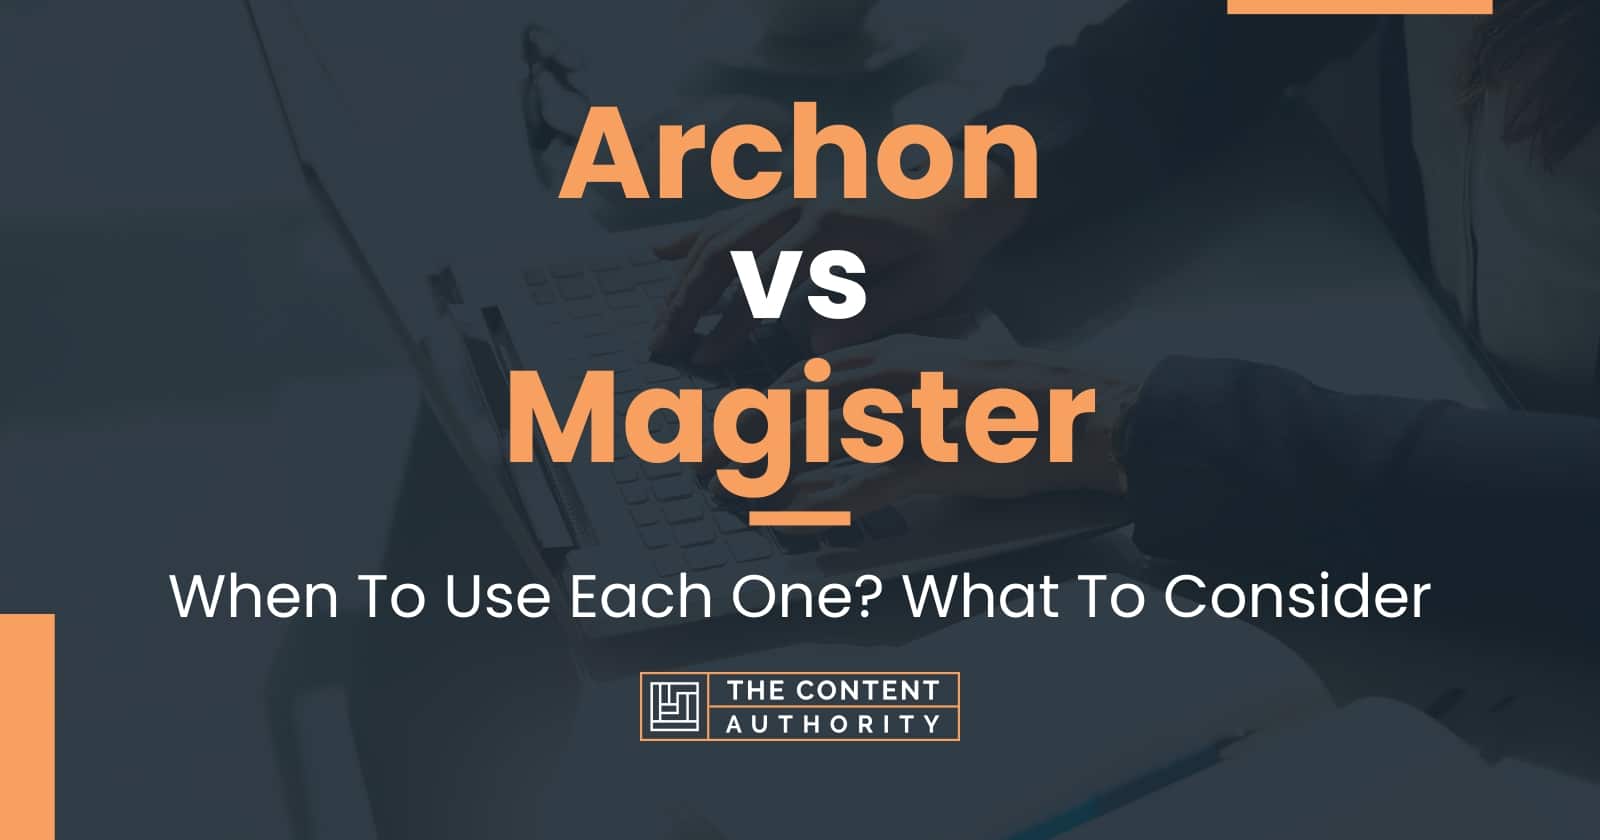 Archon vs Magister: When To Use Each One? What To Consider